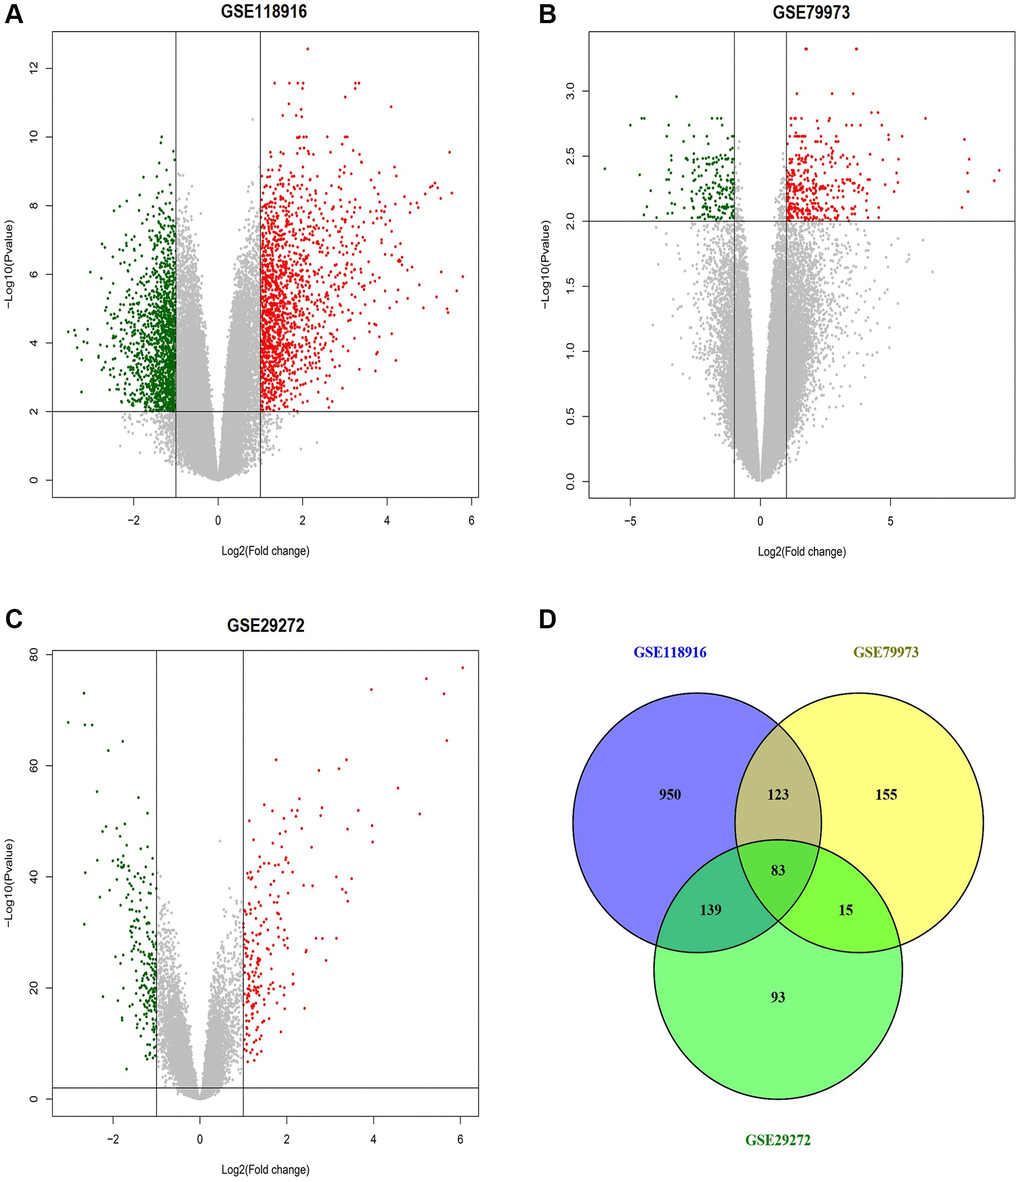 This figure depicts the process of identifying differentially expressed genes (DEGs) across the GSE118916, GSE79973, and GSE29272 datasets related to gastric cancer (GC). (A) Volcano plot of differentially expressed genes (DEGs) in the GSE118916 dataset. (B) Volcano plot of DEGs in the GSE79973 dataset. (C) Volcano plot of DEGs in the GSE29272 dataset. (D) Venn diagram showing the overlap of DEGs among the three datasets (GSE118916, GSE79973, and GSE29272). Red dots represent up-regulated genes, and green dots represent down-regulated genes. The numbers in Venn diagram represent the count of unique and overlapping genes among the datasets. P-value 